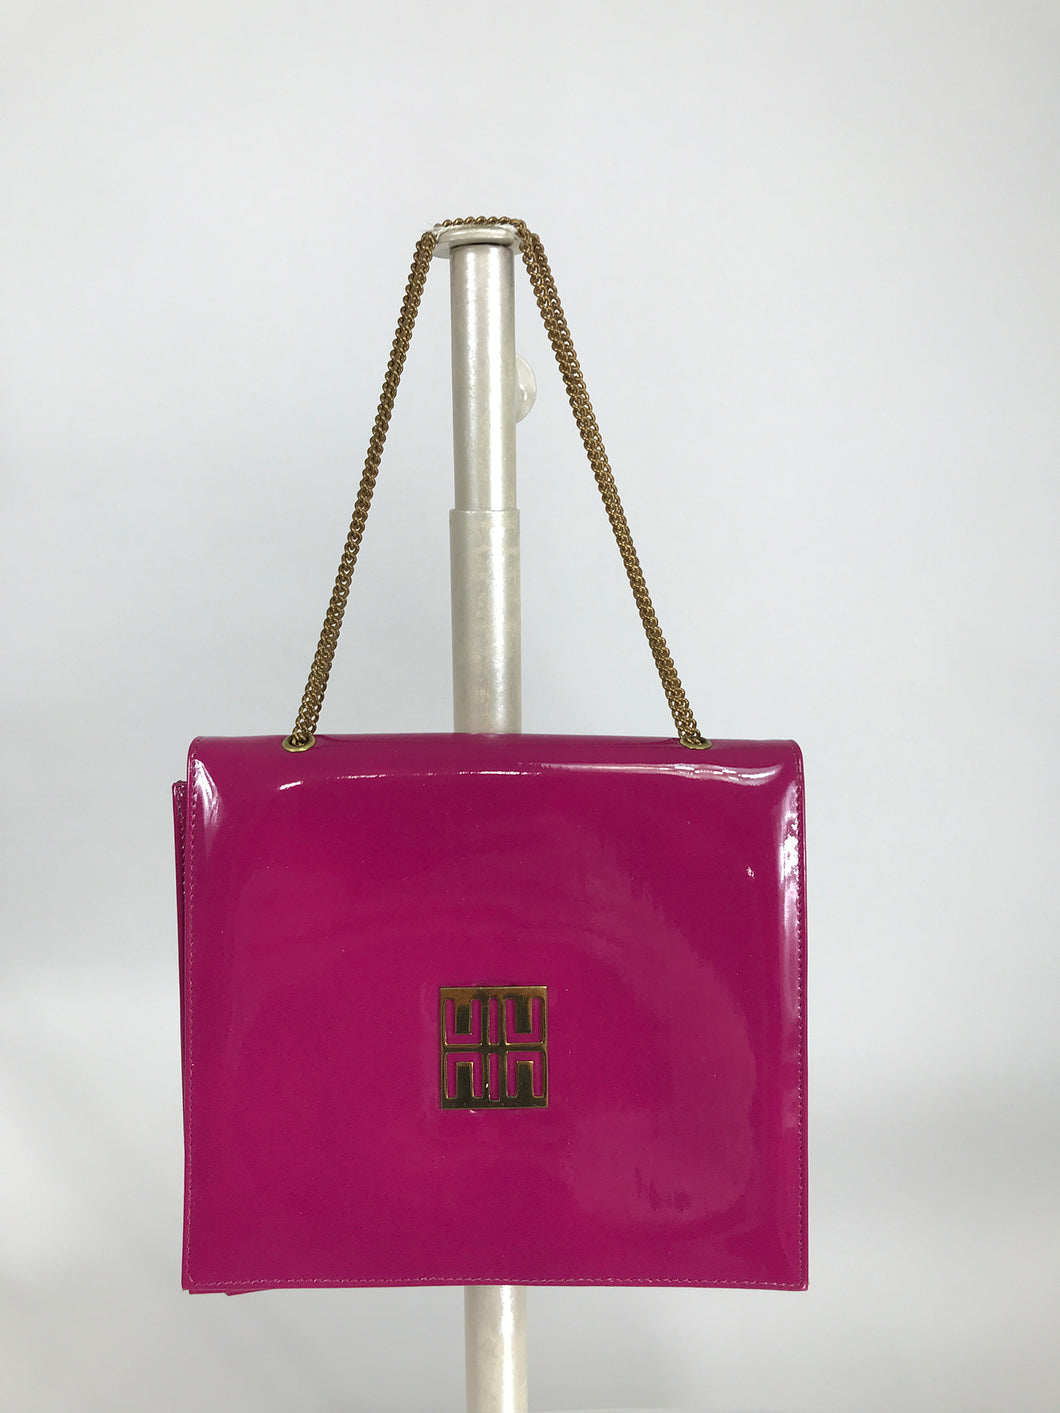 Novelty Pink Patent Leather with Gold Hardware Flap Front Handbag